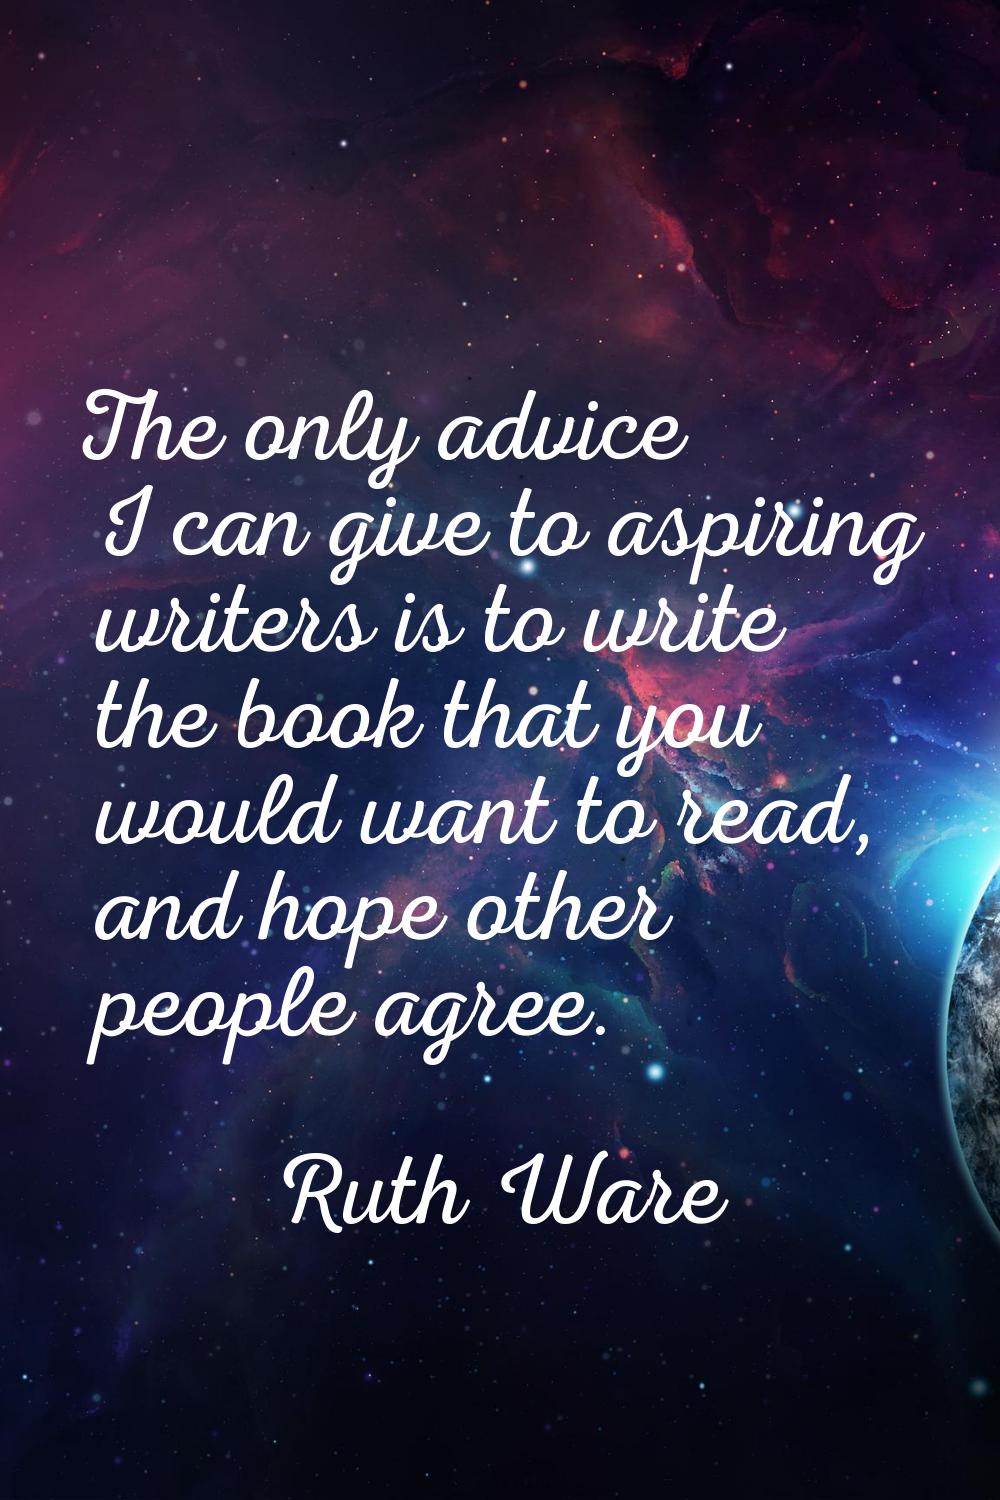 The only advice I can give to aspiring writers is to write the book that you would want to read, an